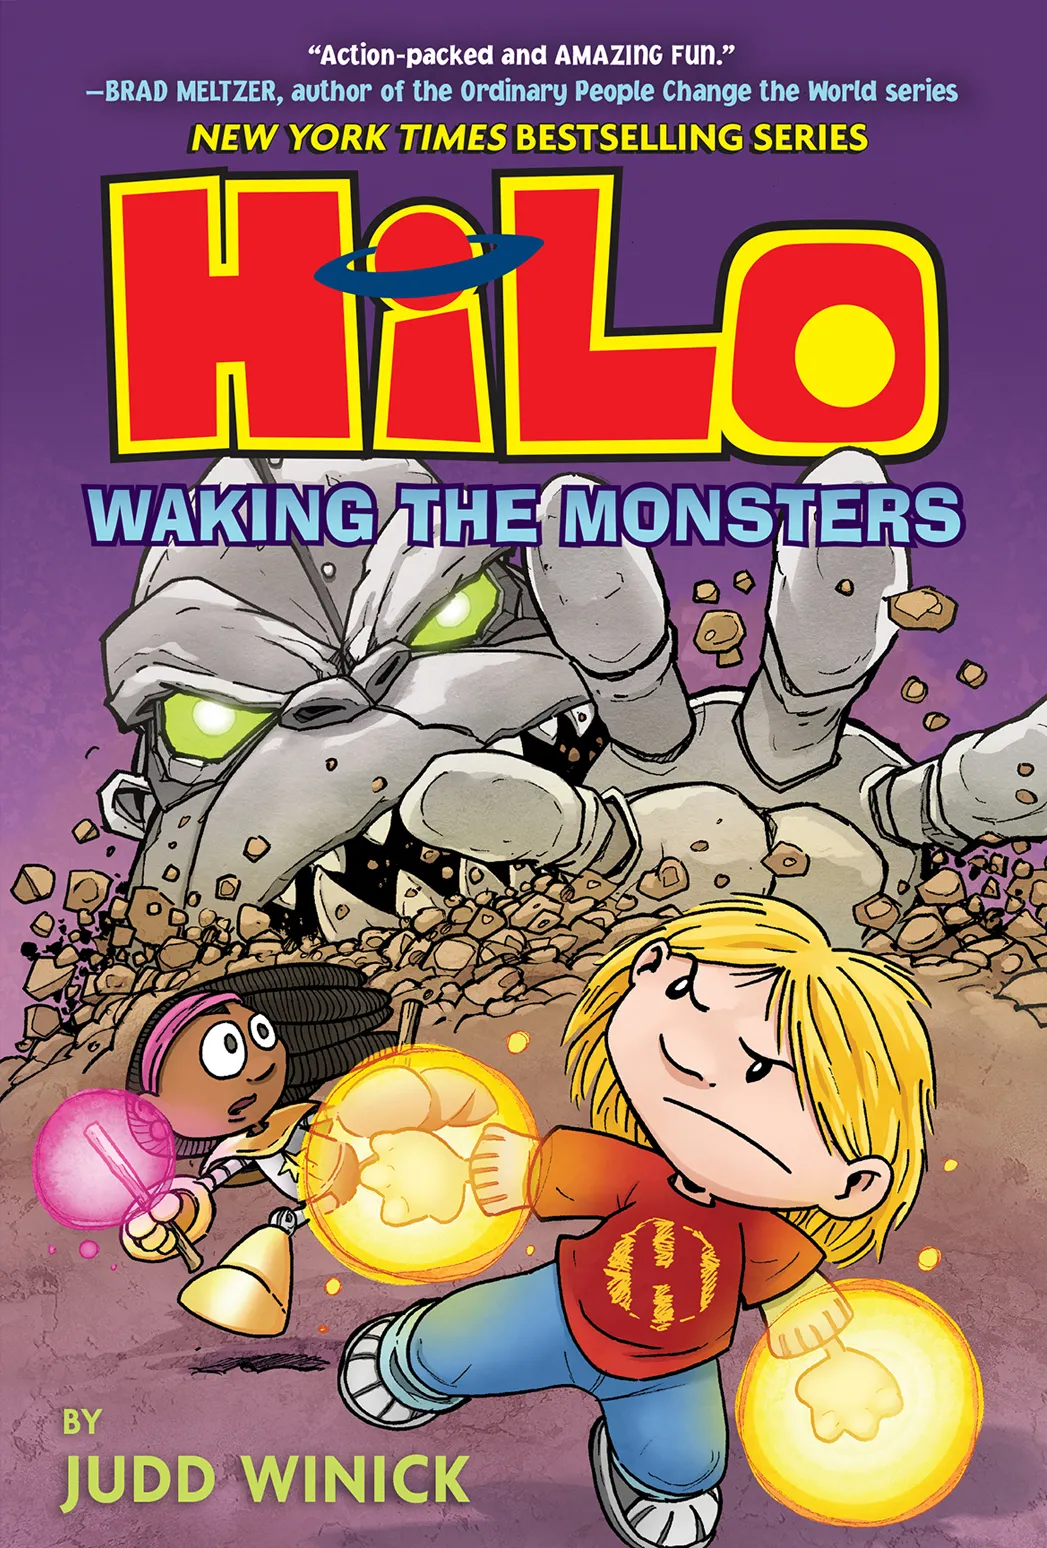 Waking the Monsters (Hilo #4)